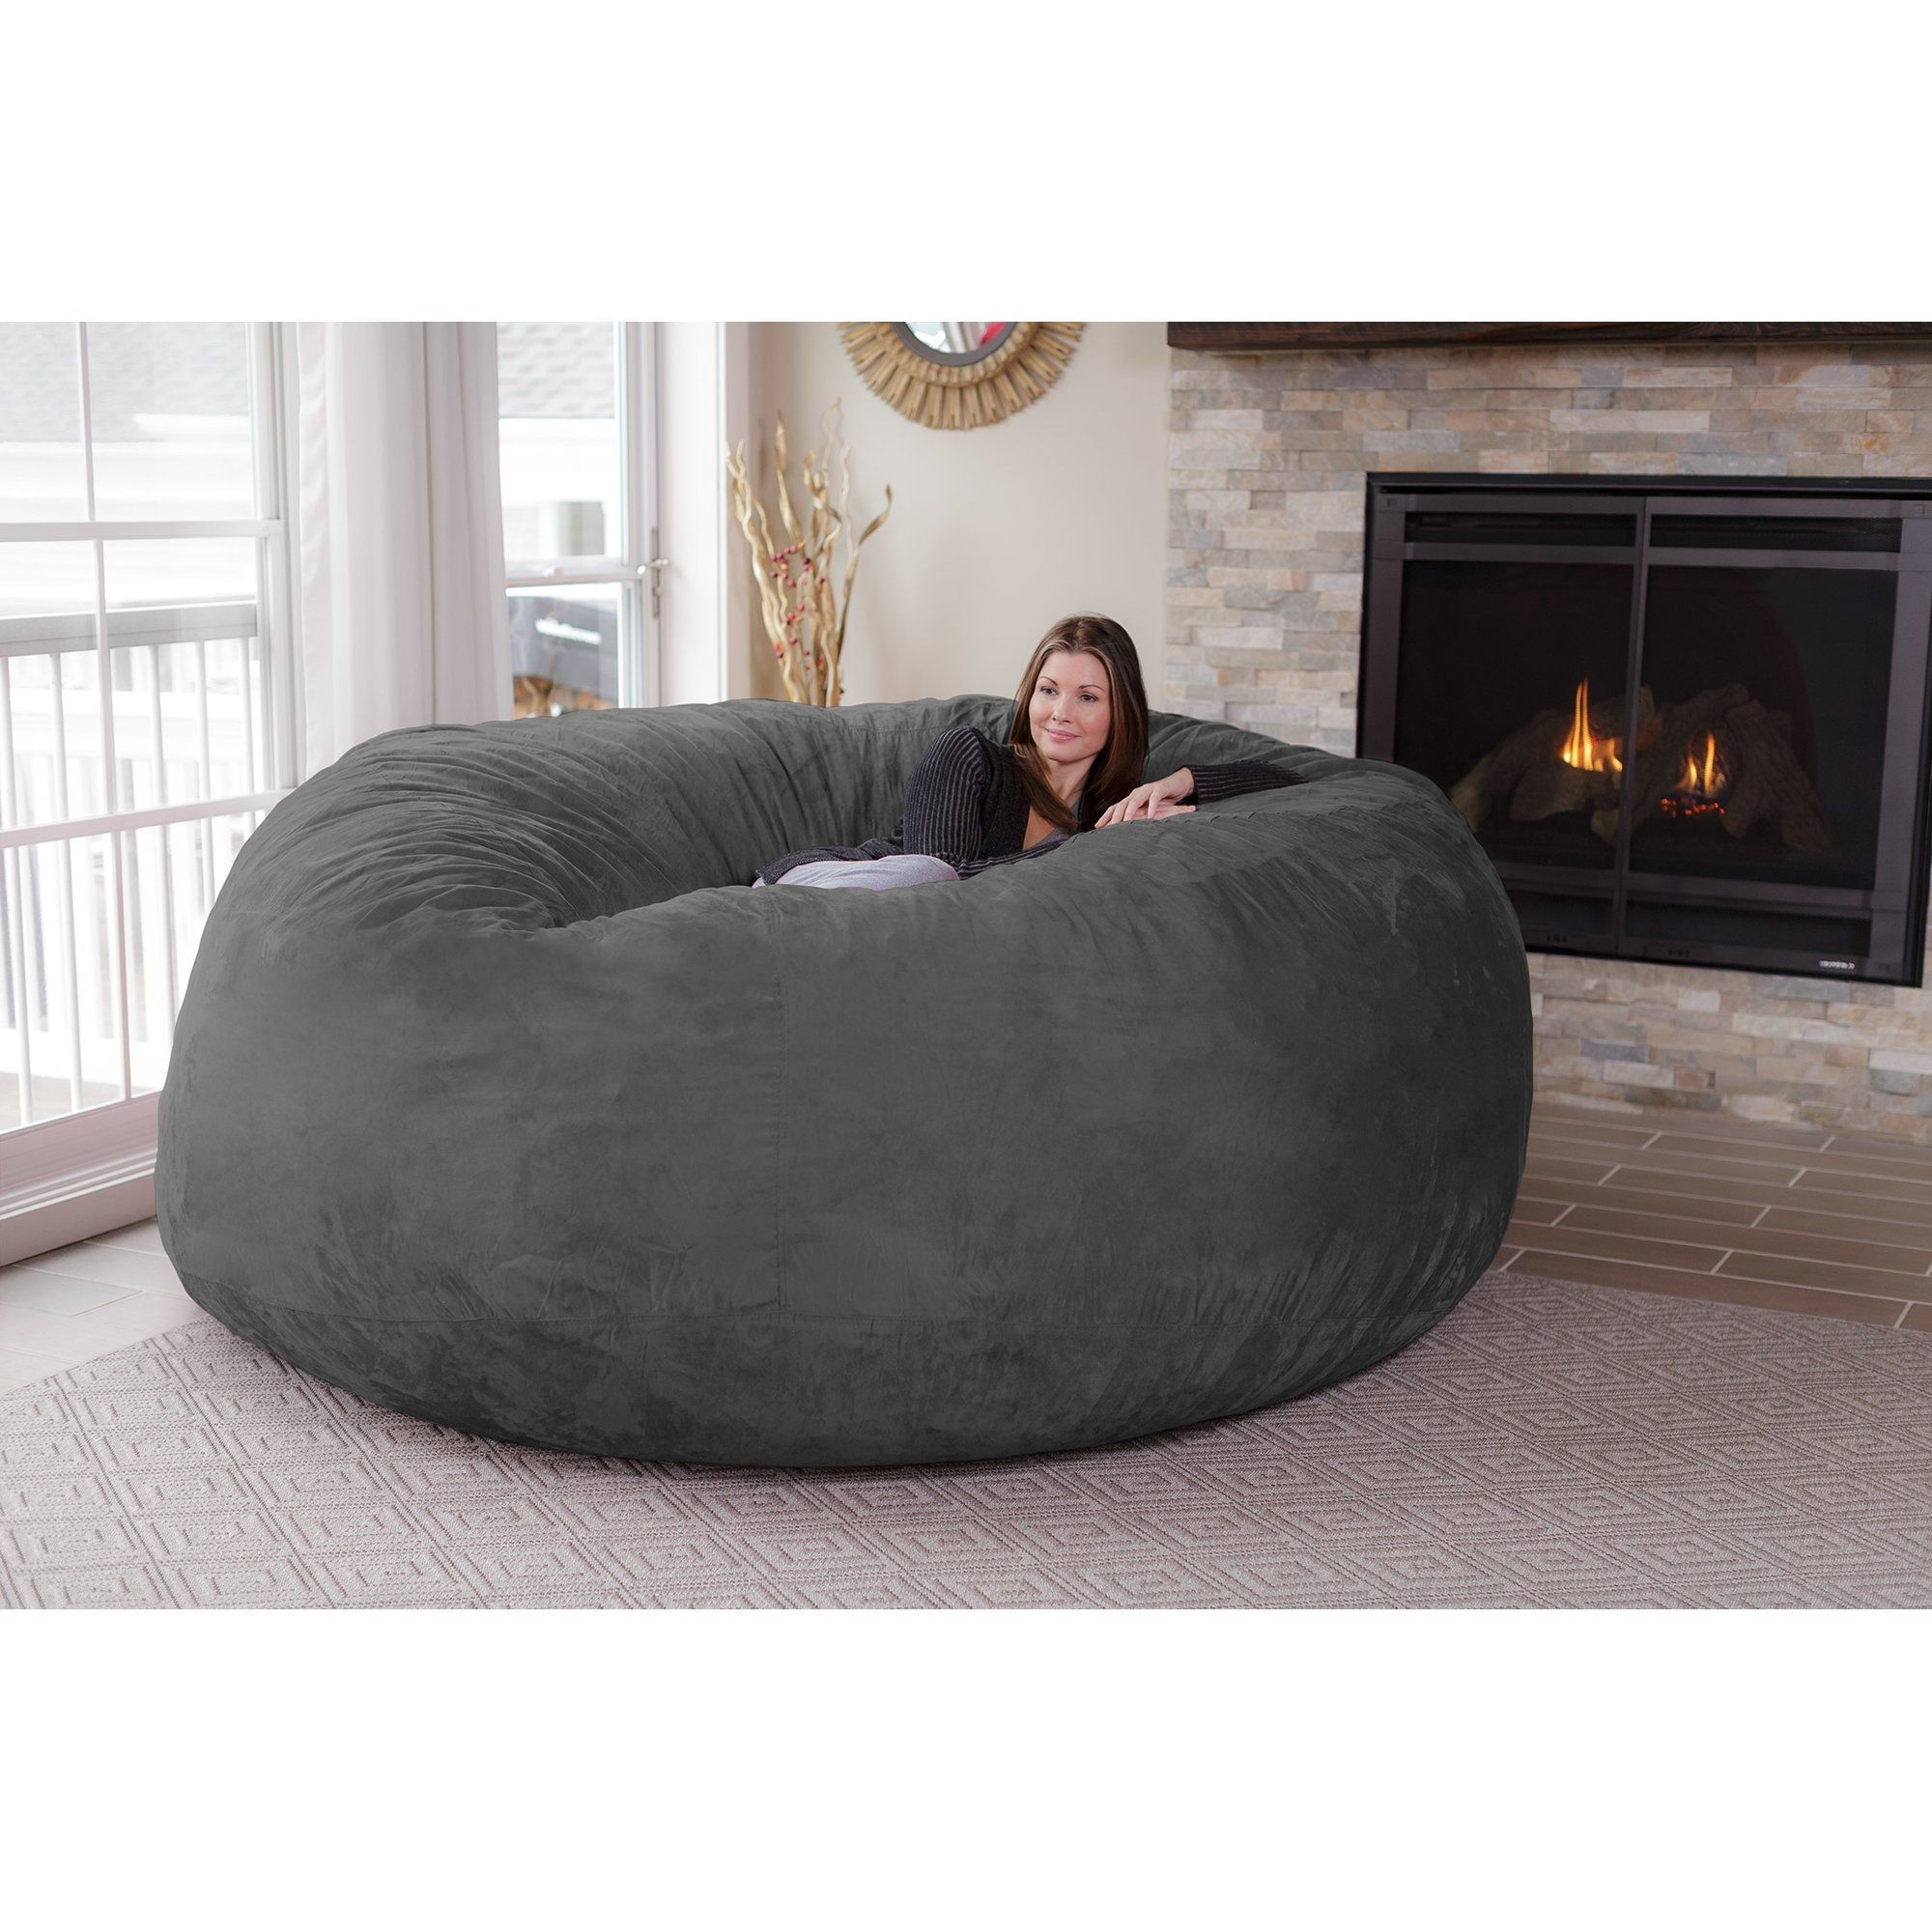 Beautiful Large Bean Bag Sofa Photos Design Ideas Collections With Regard To Bean Bag Sofas And Chairs (View 10 of 15)